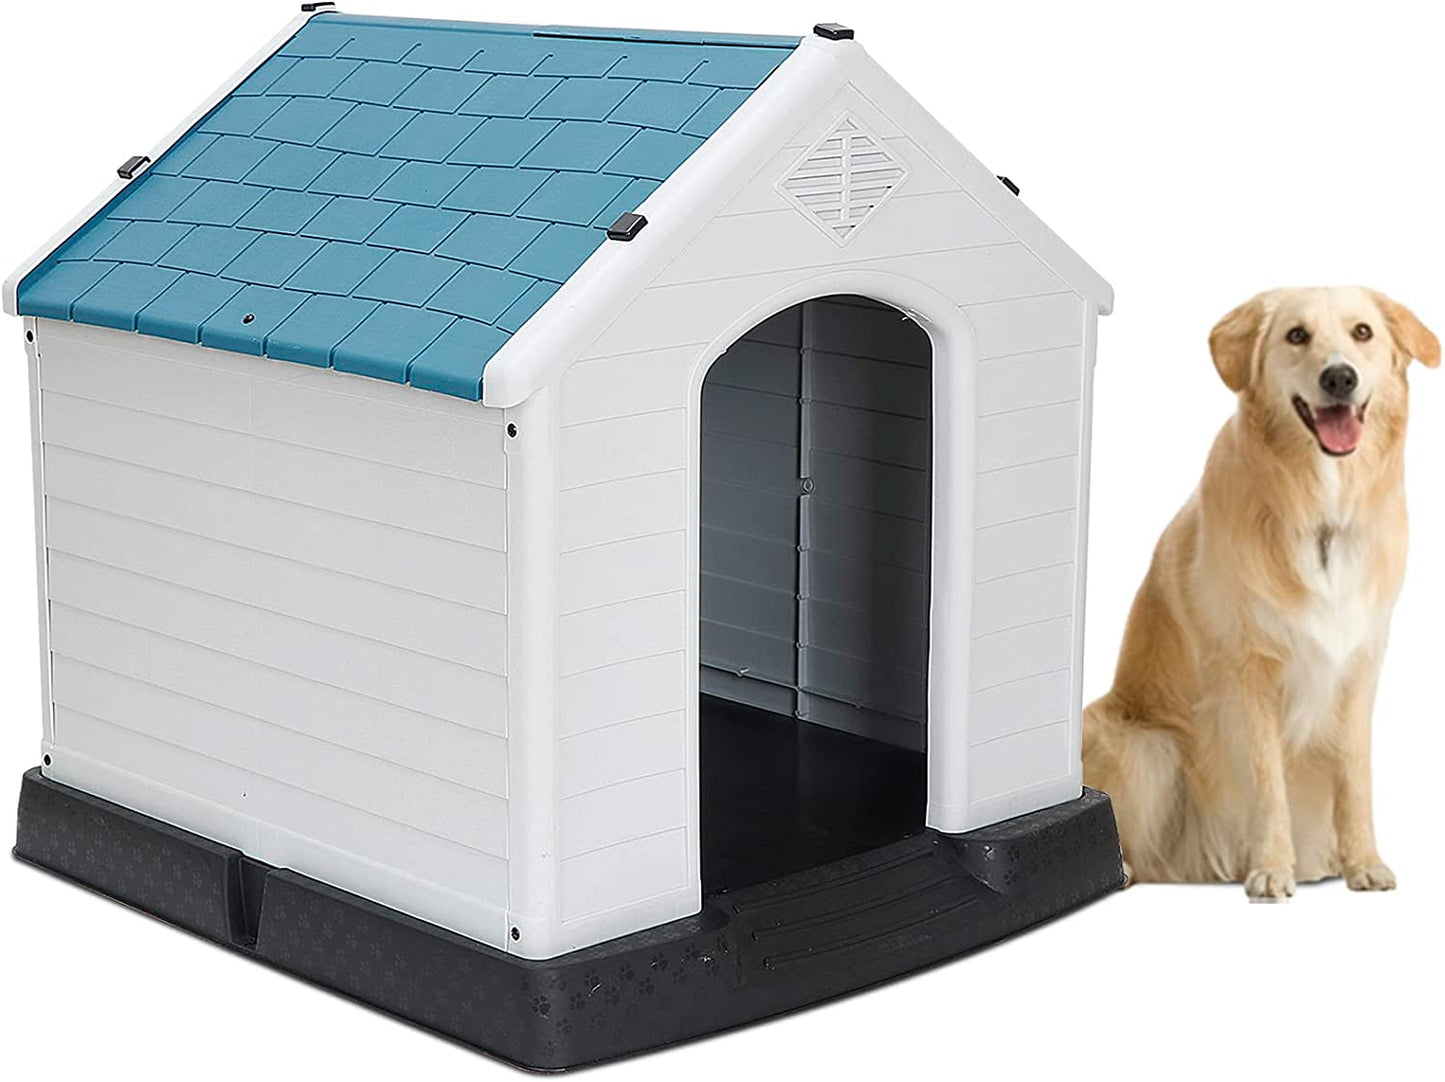 Plastic Dog House - Water Resistant Dog Kennel for Small to Medium Sized Dogs All Weather Indoor Outdoor Doghouse Puppy Shelter